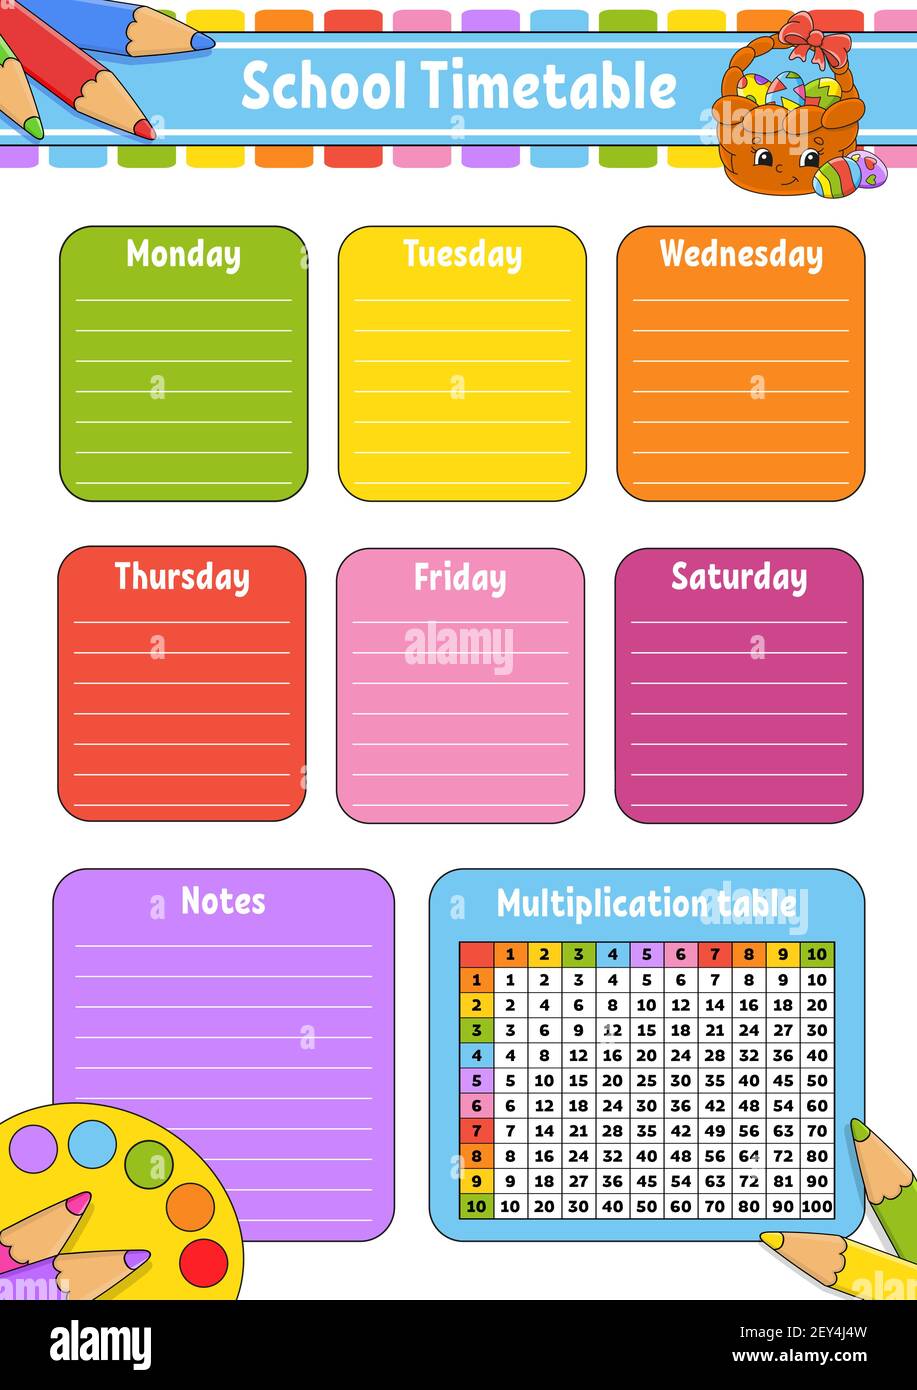 School timetable with multiplication table. For the education of children. Isolated on a white background. With a cute cartoon character. Stock Vector